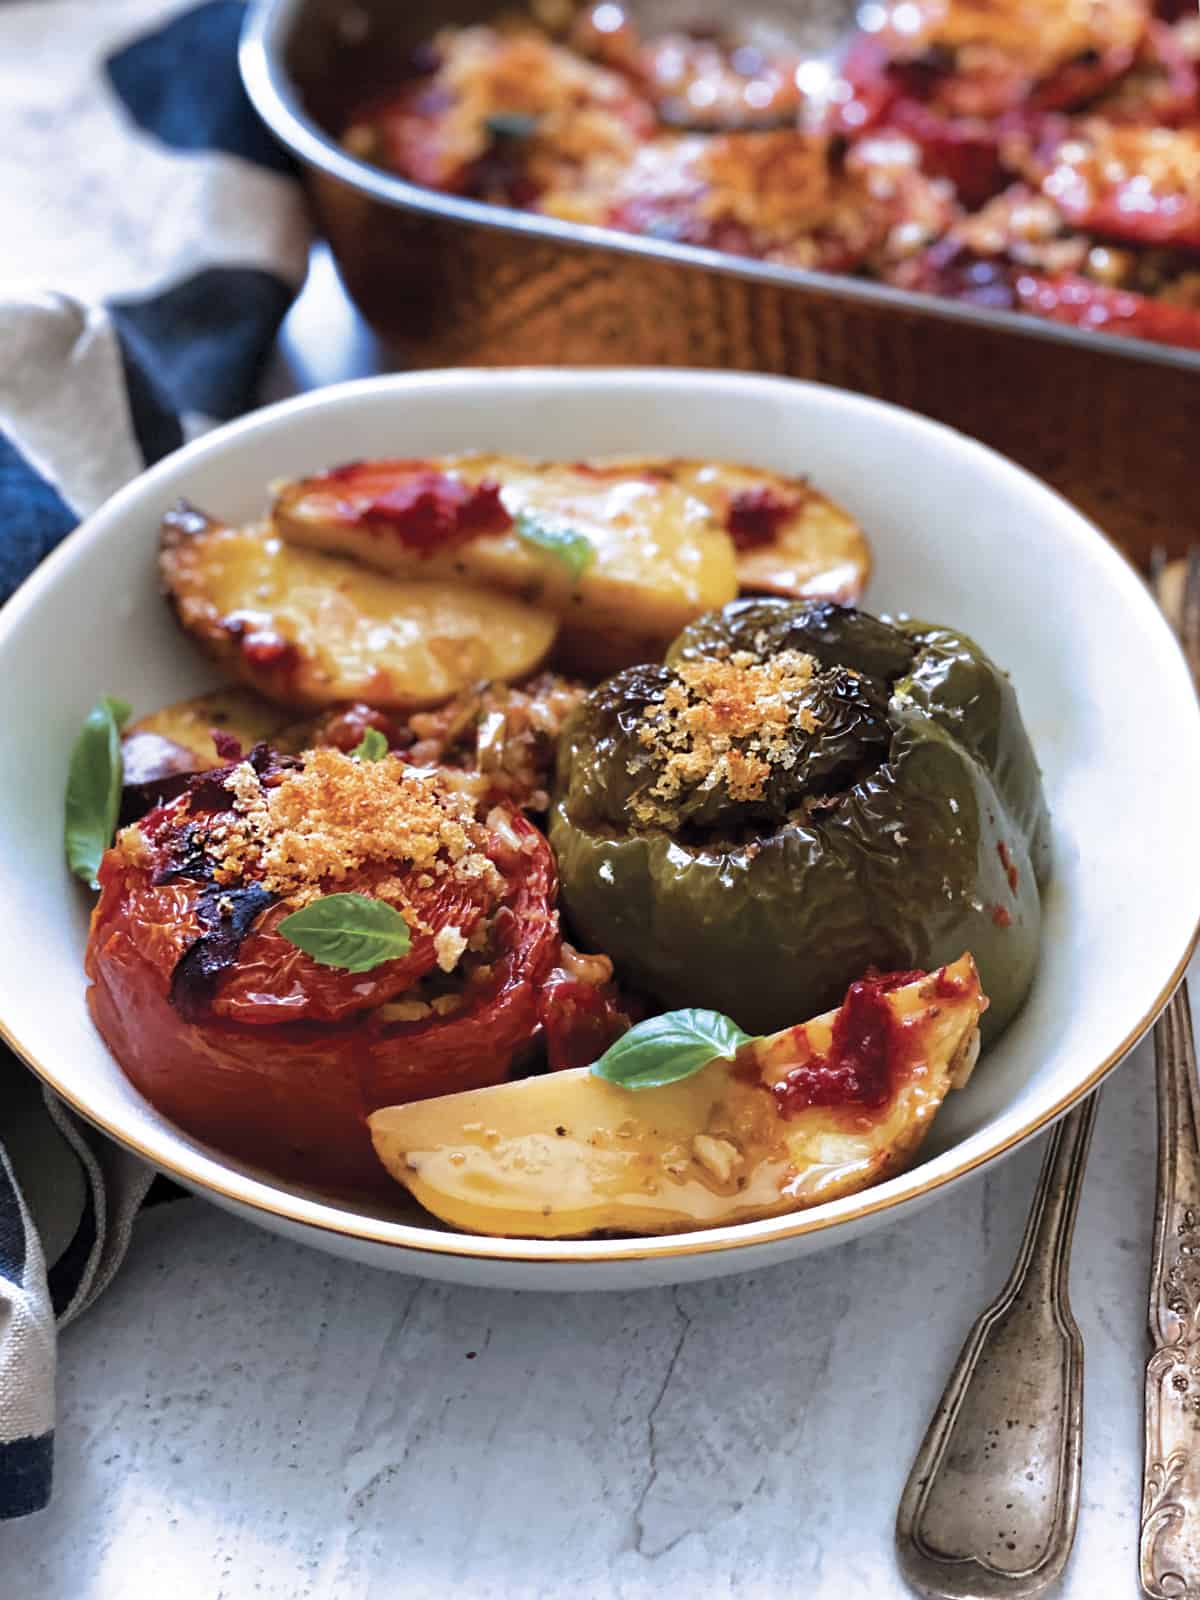 A plate with a stuffed tomato and a green bell pepper, potatoes and fresh herbs. A pan with food at the back and a cloth napkin.